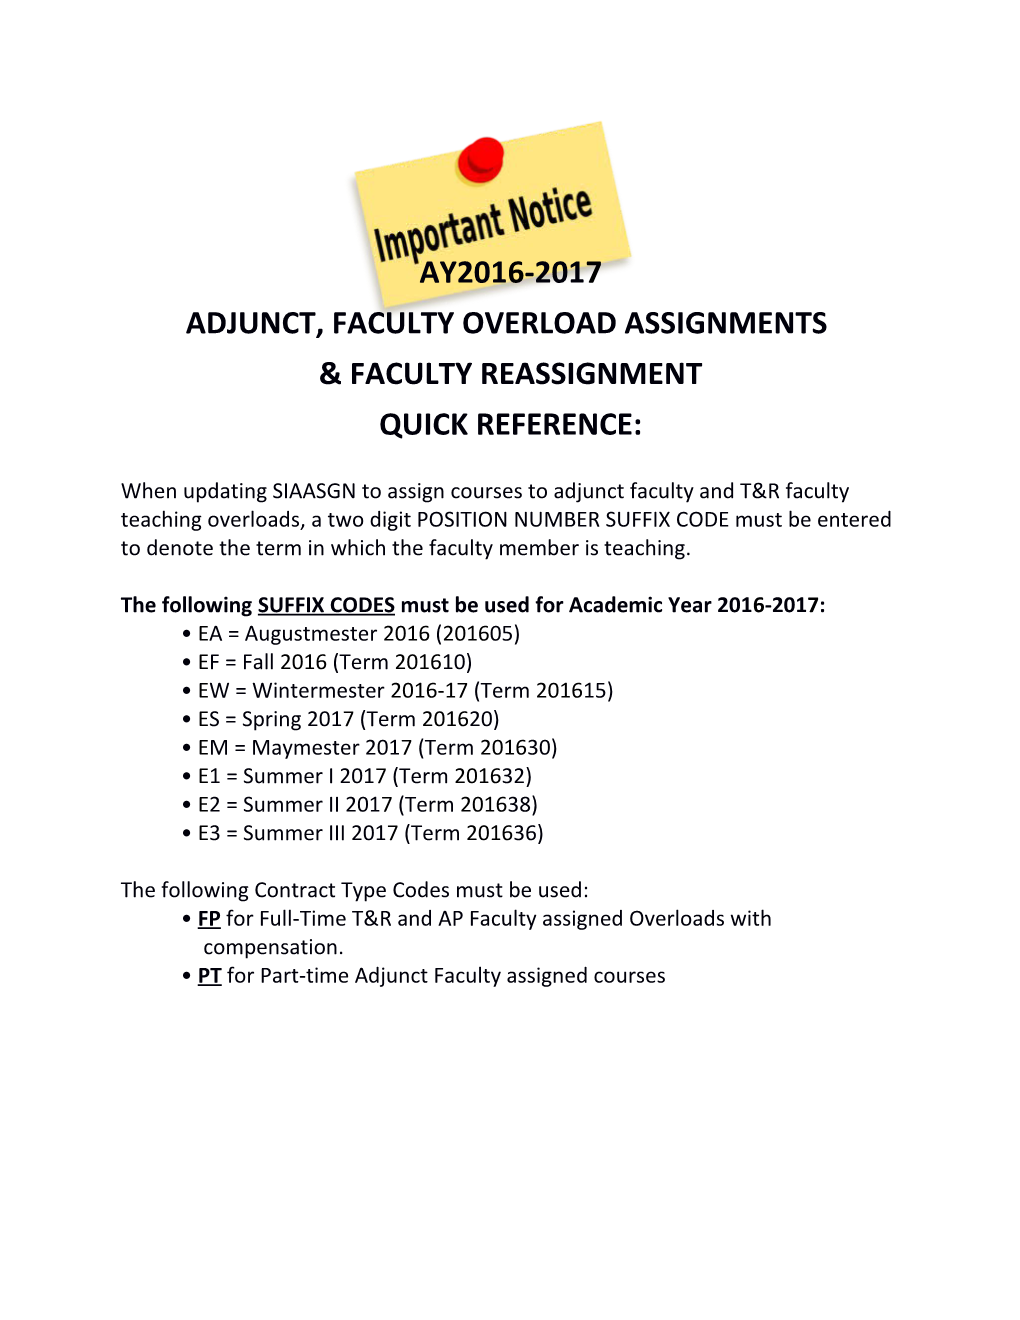 Adjunct, Faculty Overload Assignments